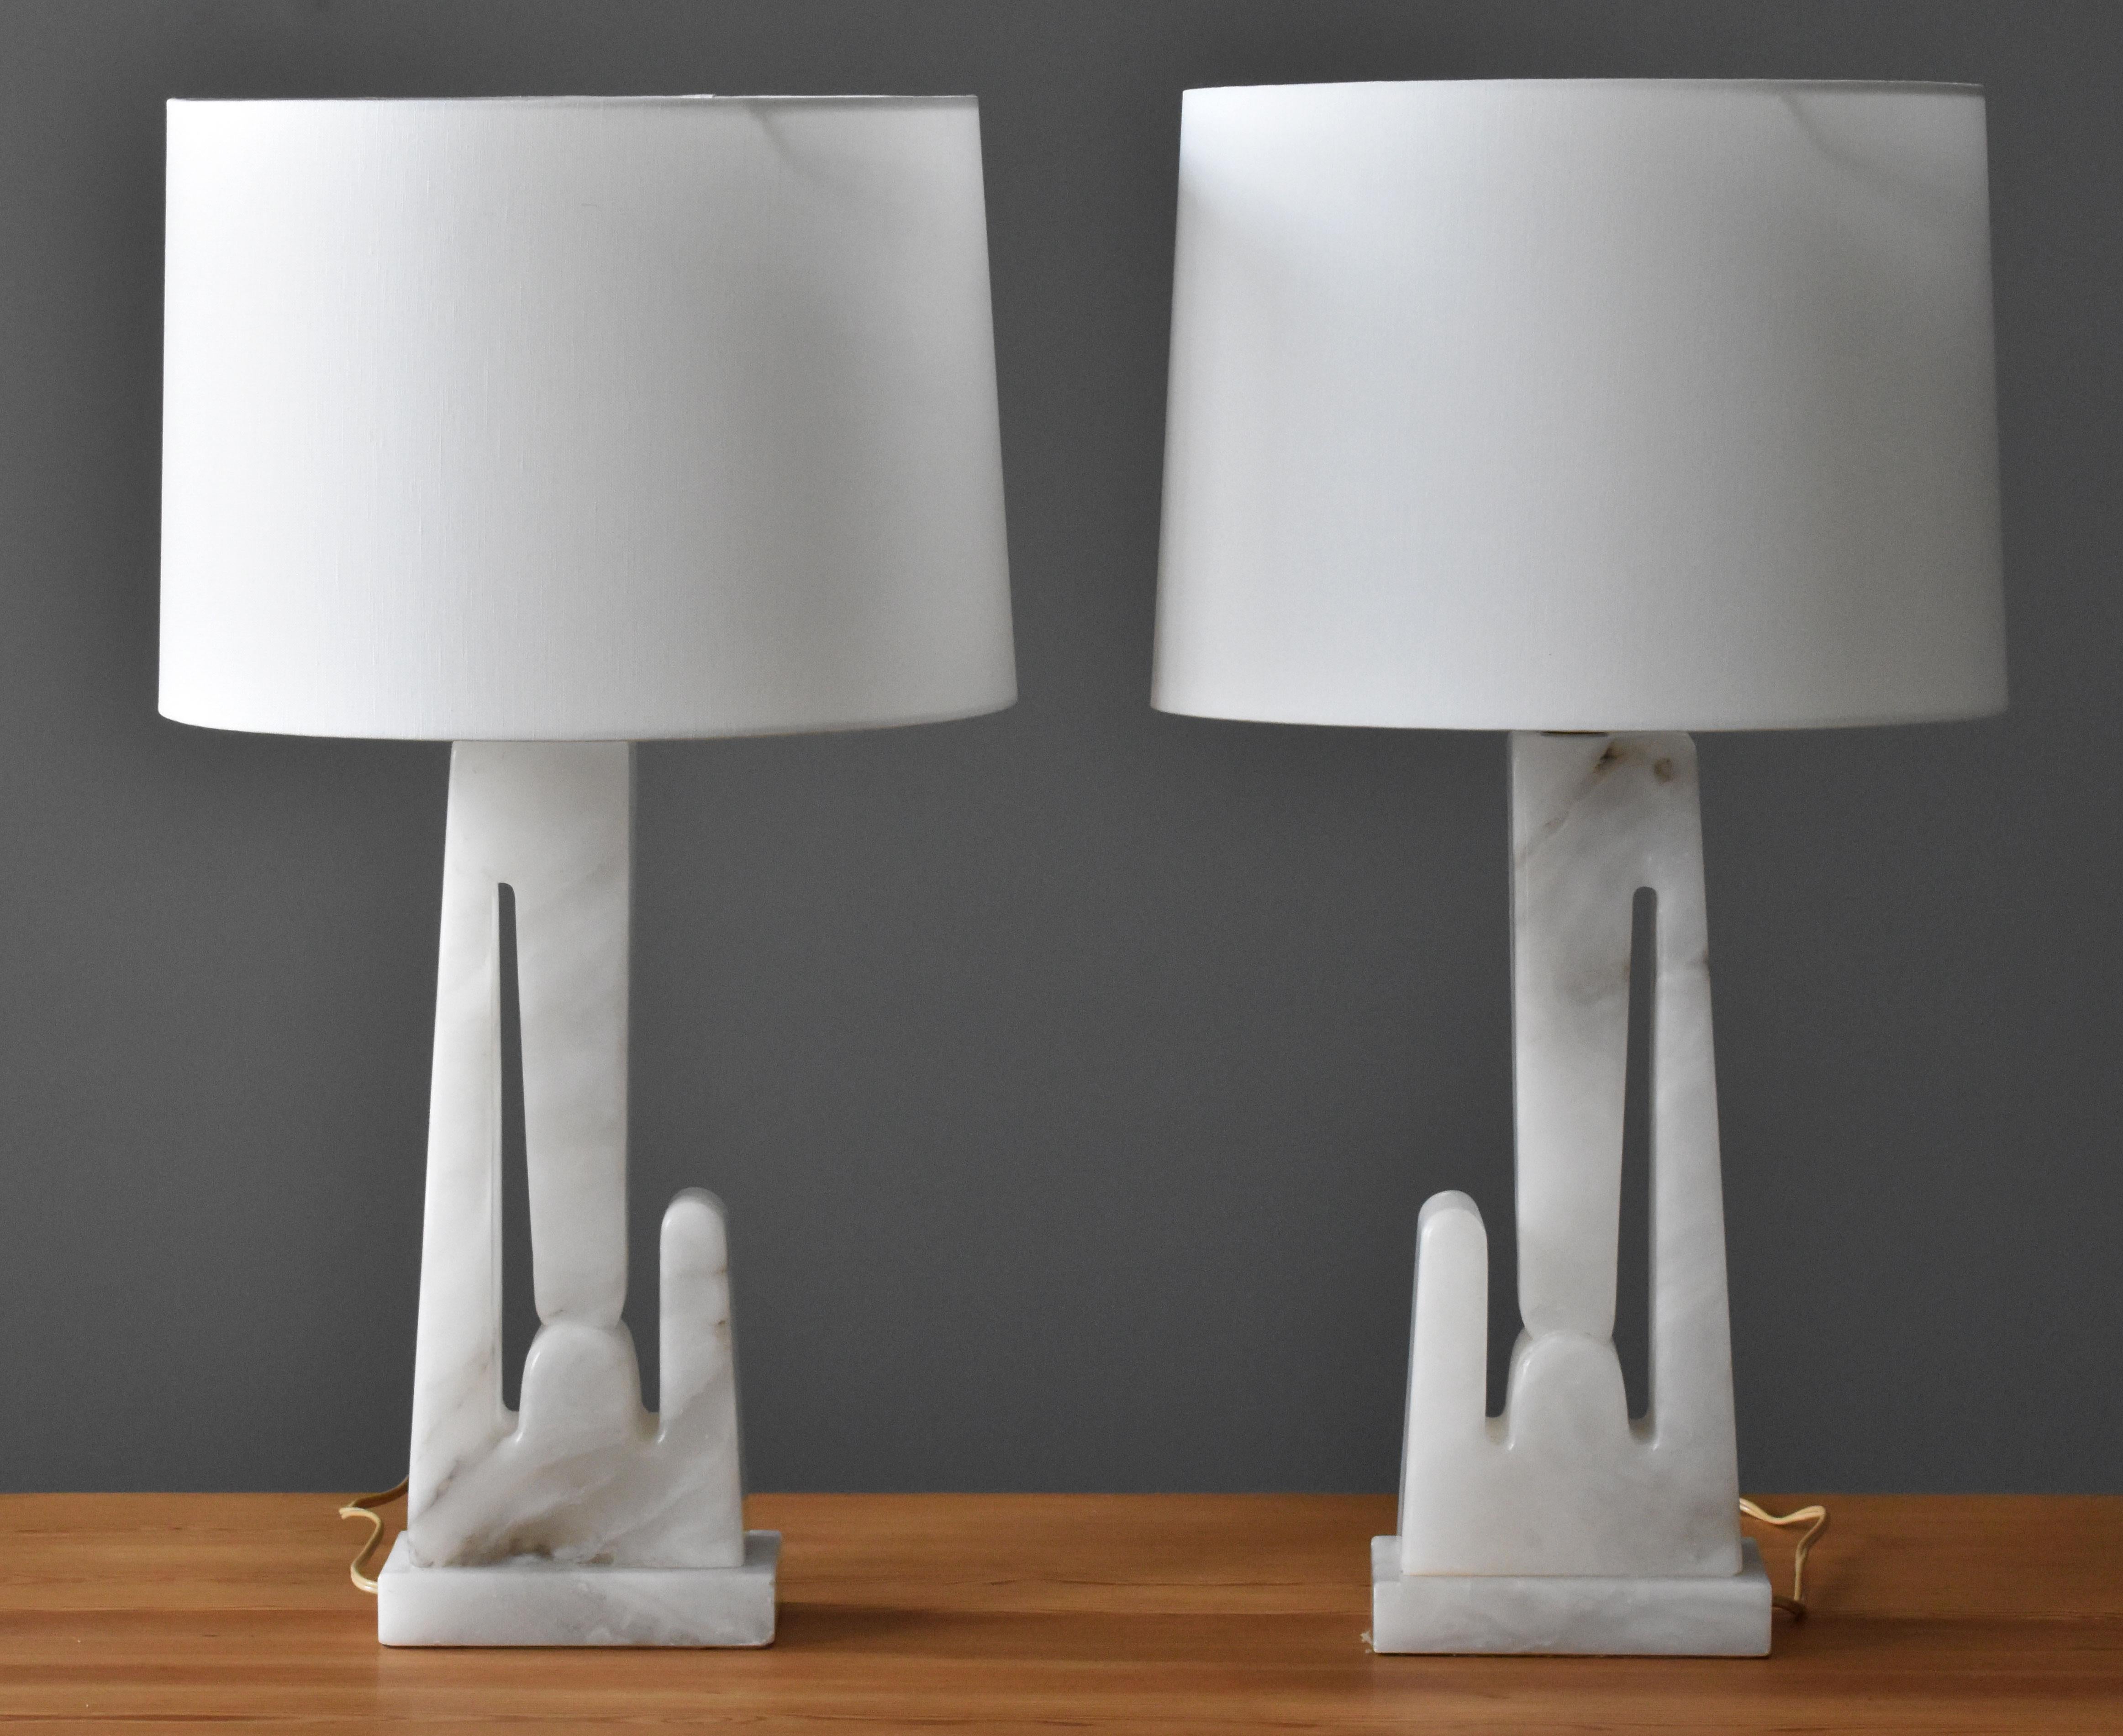 A pair of marble table lamps by an unknown modernist designer. Produced in America, 1960s.

Other American designers of the period include Vladimir Kagan, Isamu Noguchi, George Nakashima, Paul Frankl, and Jane & Gordon Martz. Sold without lampshades.